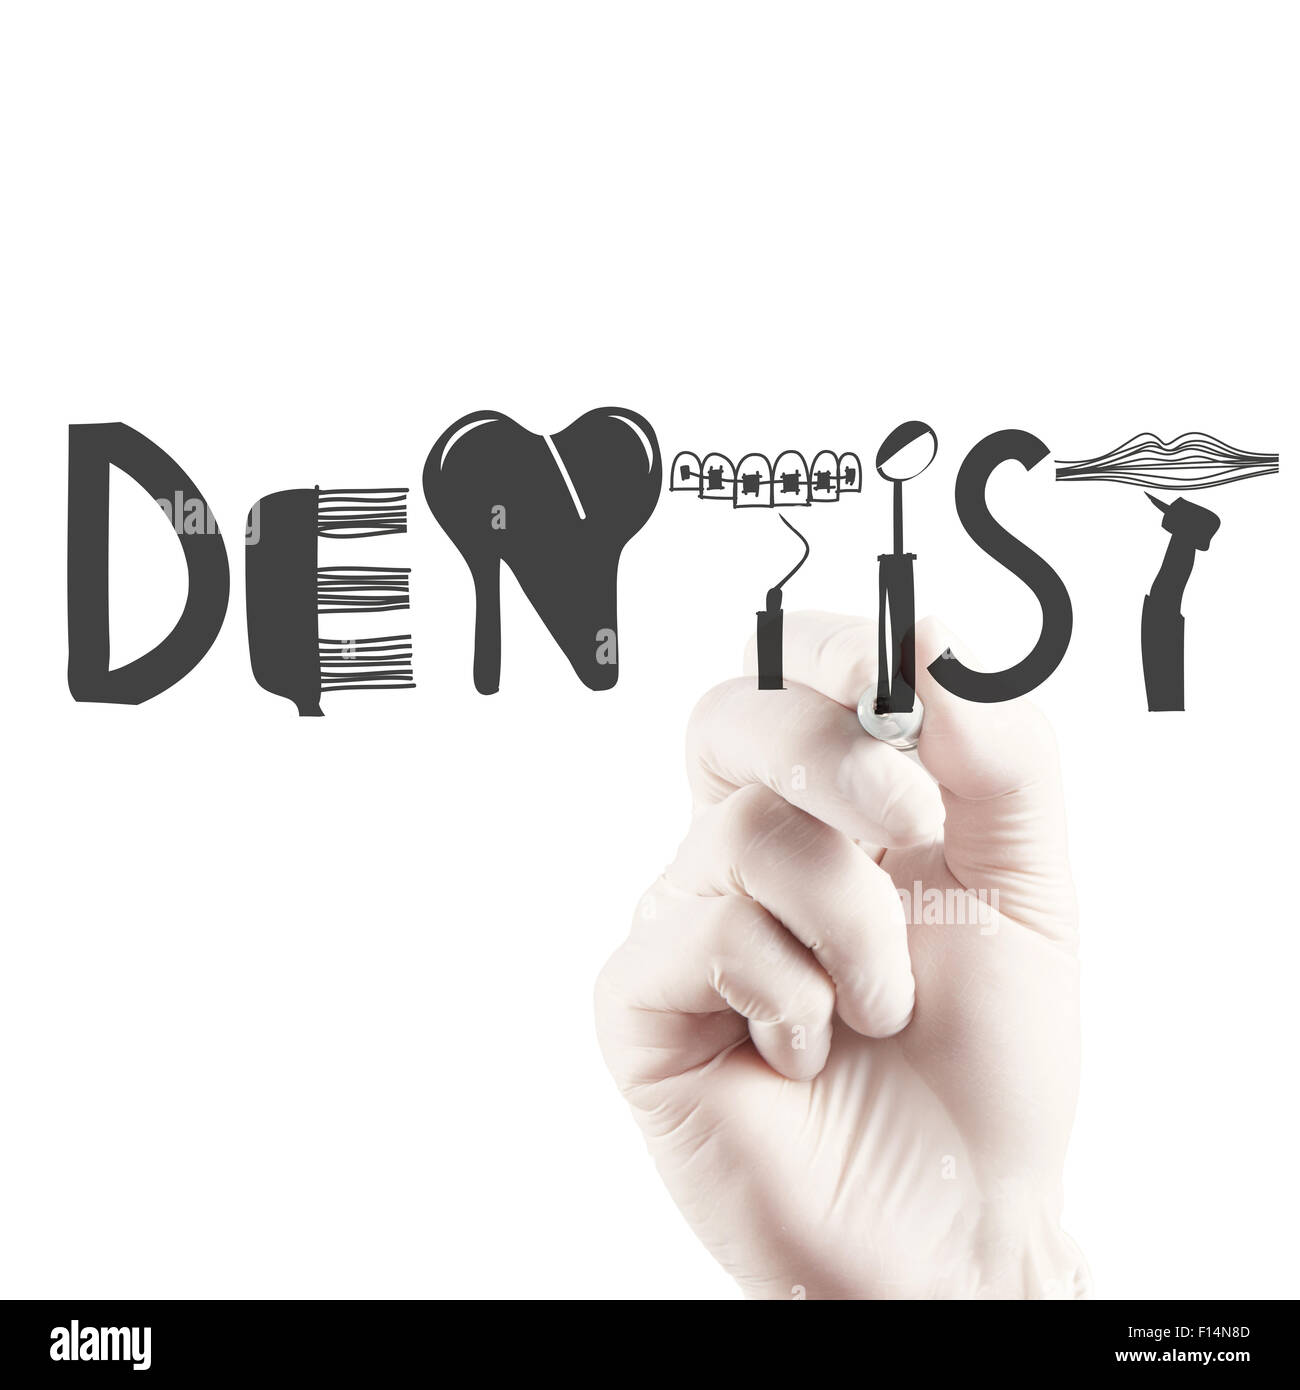 doctor hand drawing design word DENTIST as concept Stock Photo